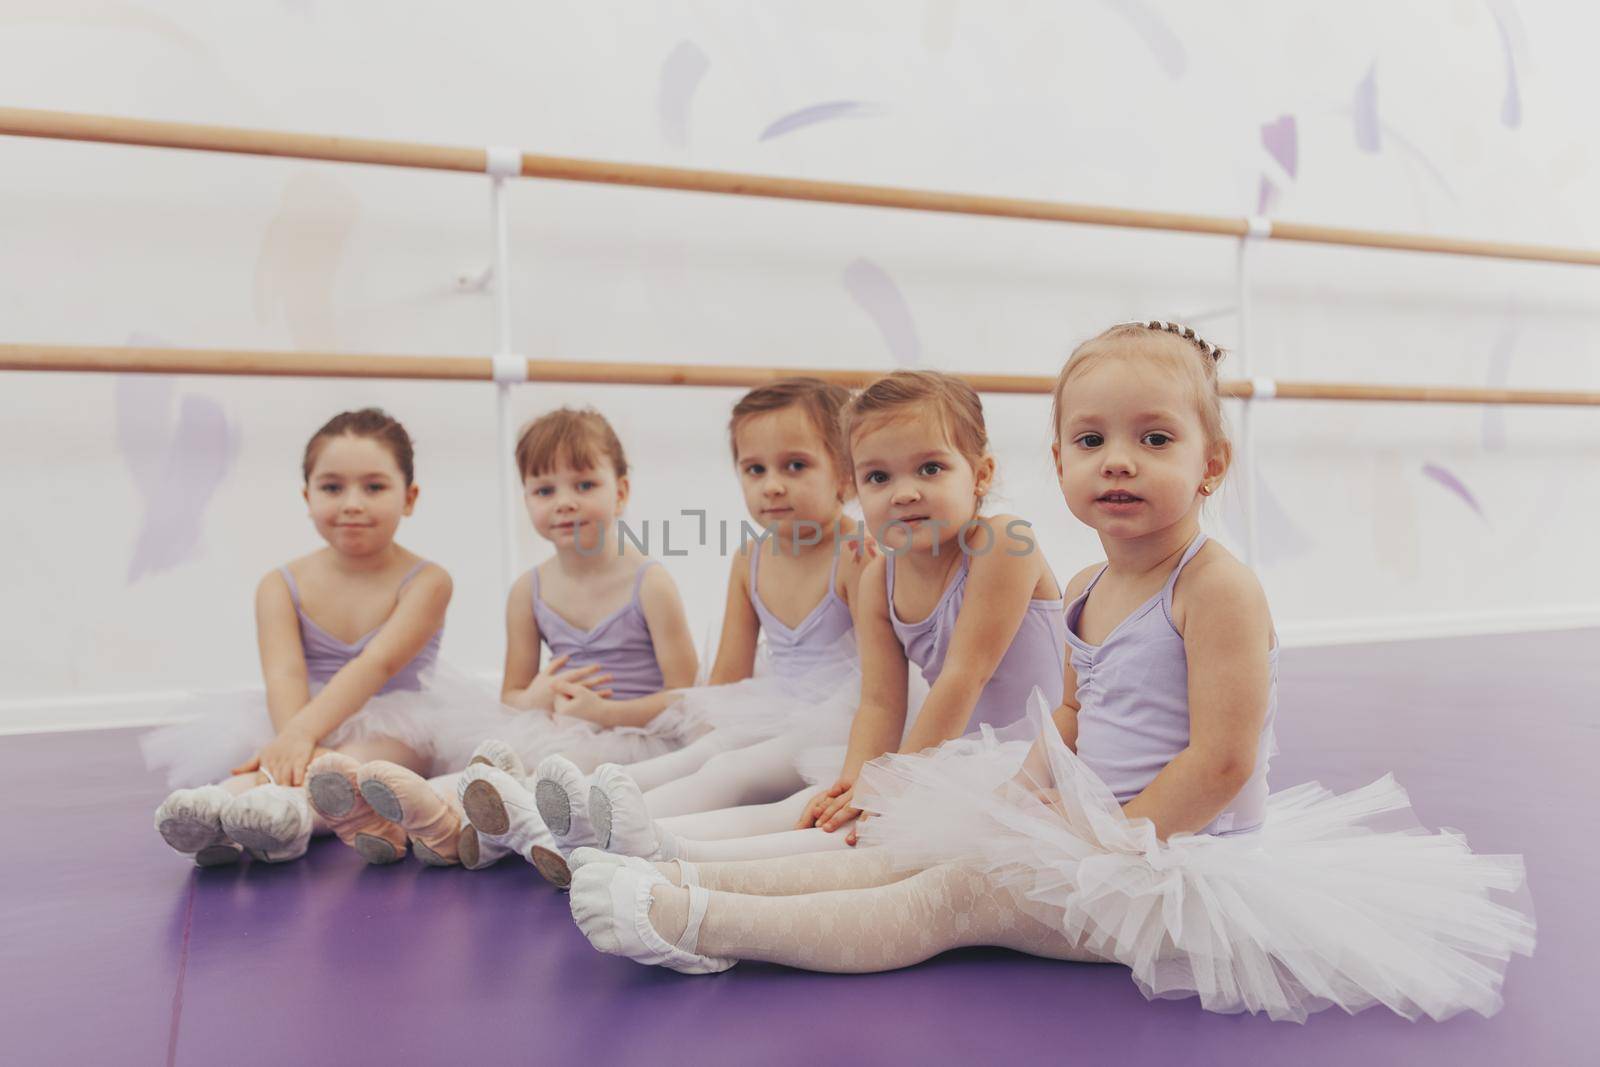 Lovely little ballerinas at the dance studio by MAD_Production